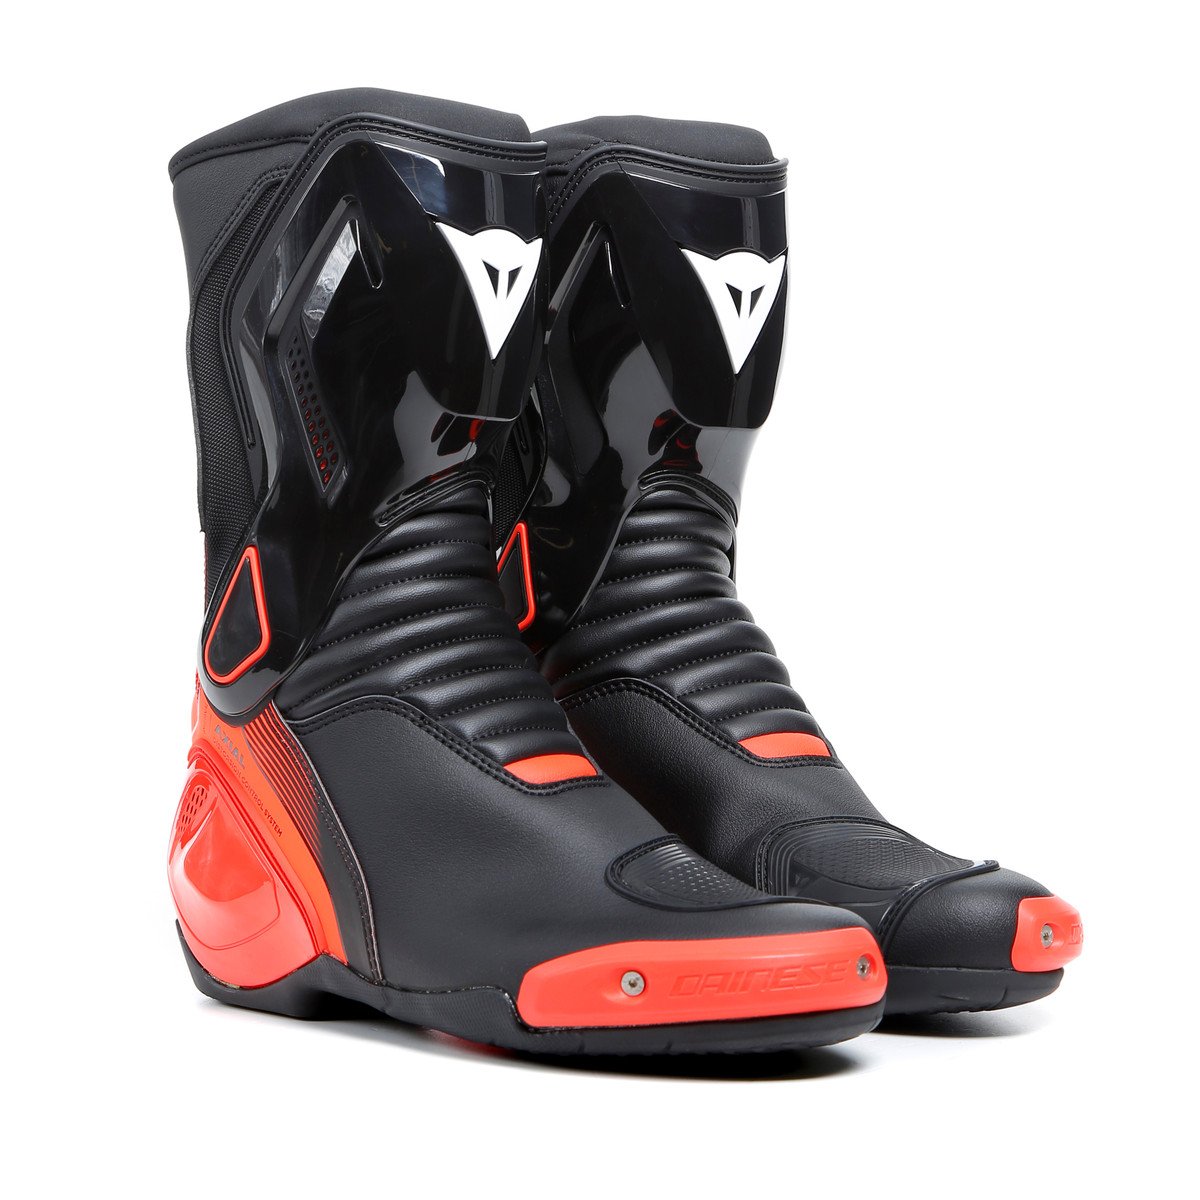 Image of Dainese Nexus 2 Boots Black Fluo Red Size 43 ID 8051019292803